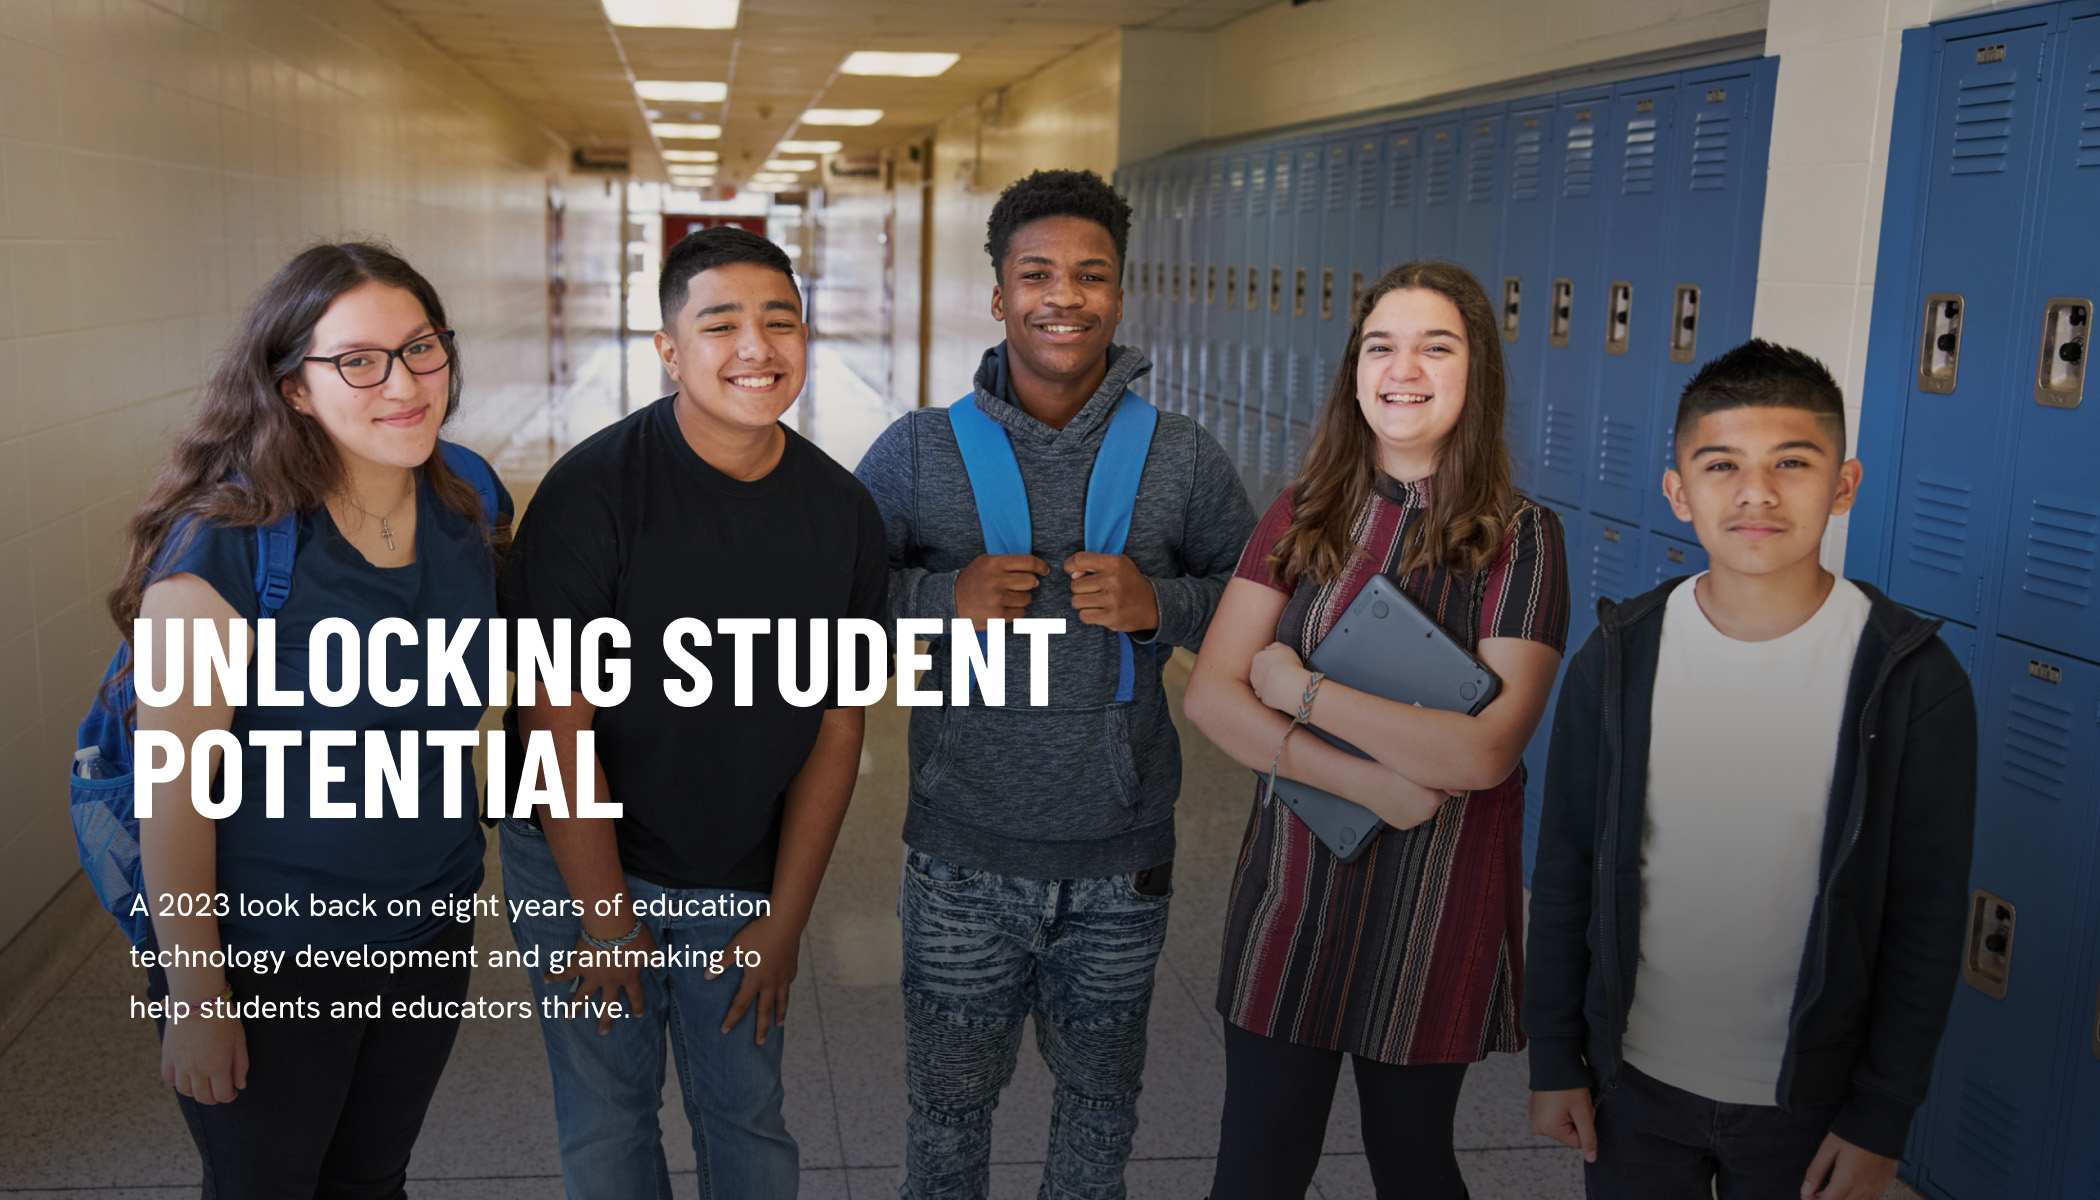 Five teenaged students stand in a school hallway surrounded by lockers.